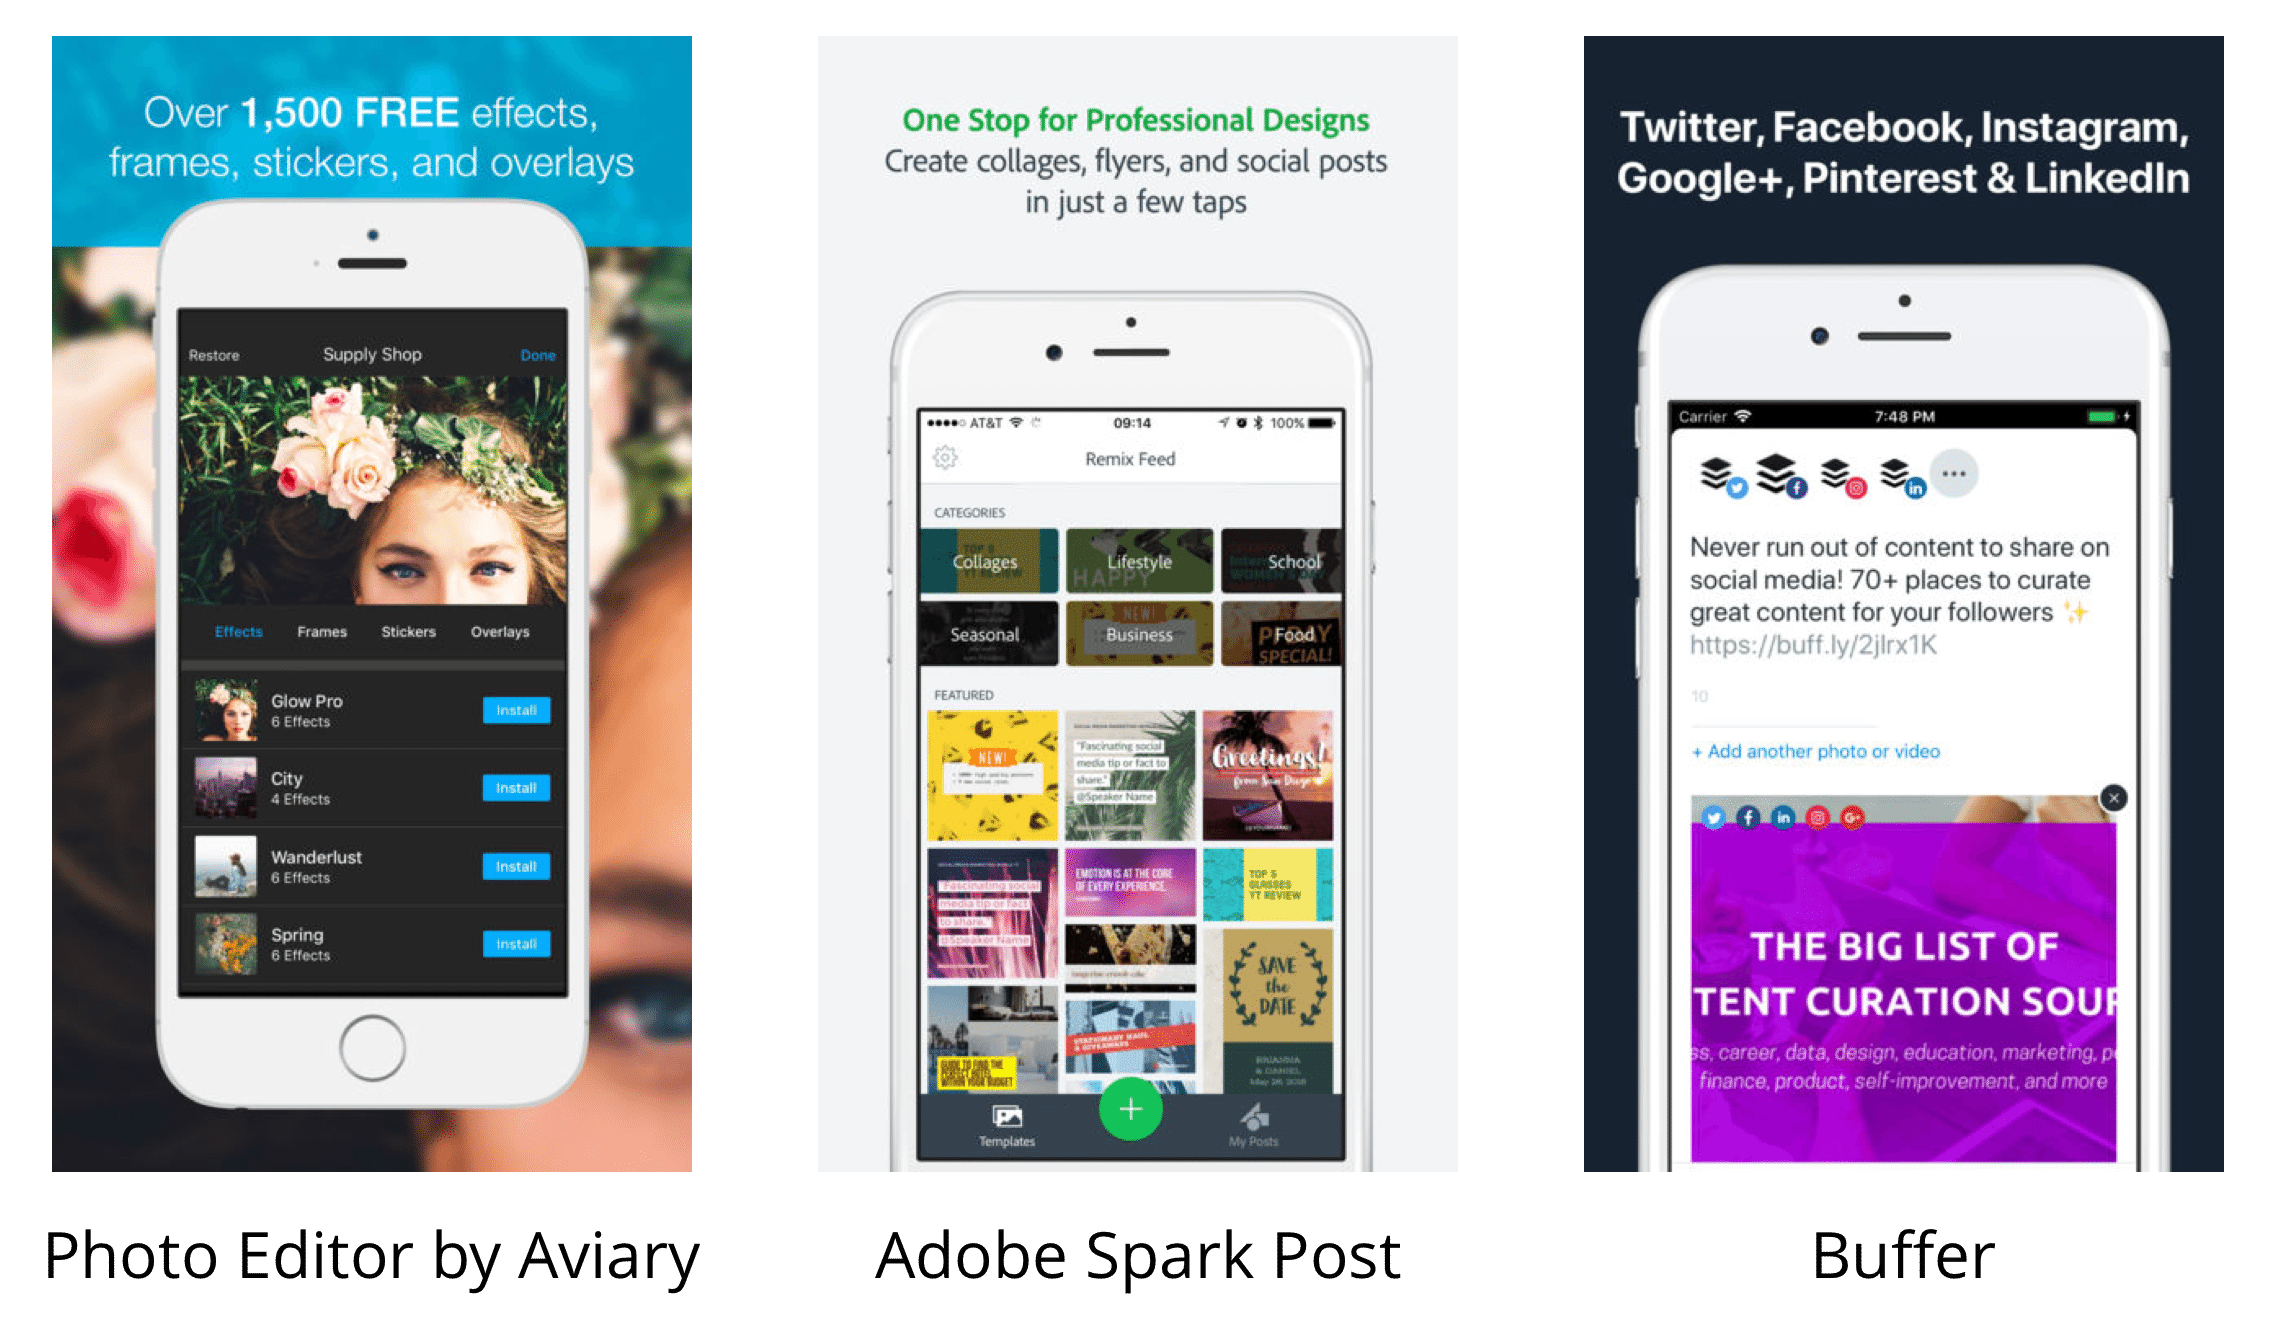 Instagram tools: Photo Editor by Aviary, Adobe Spark Post, and Buffer